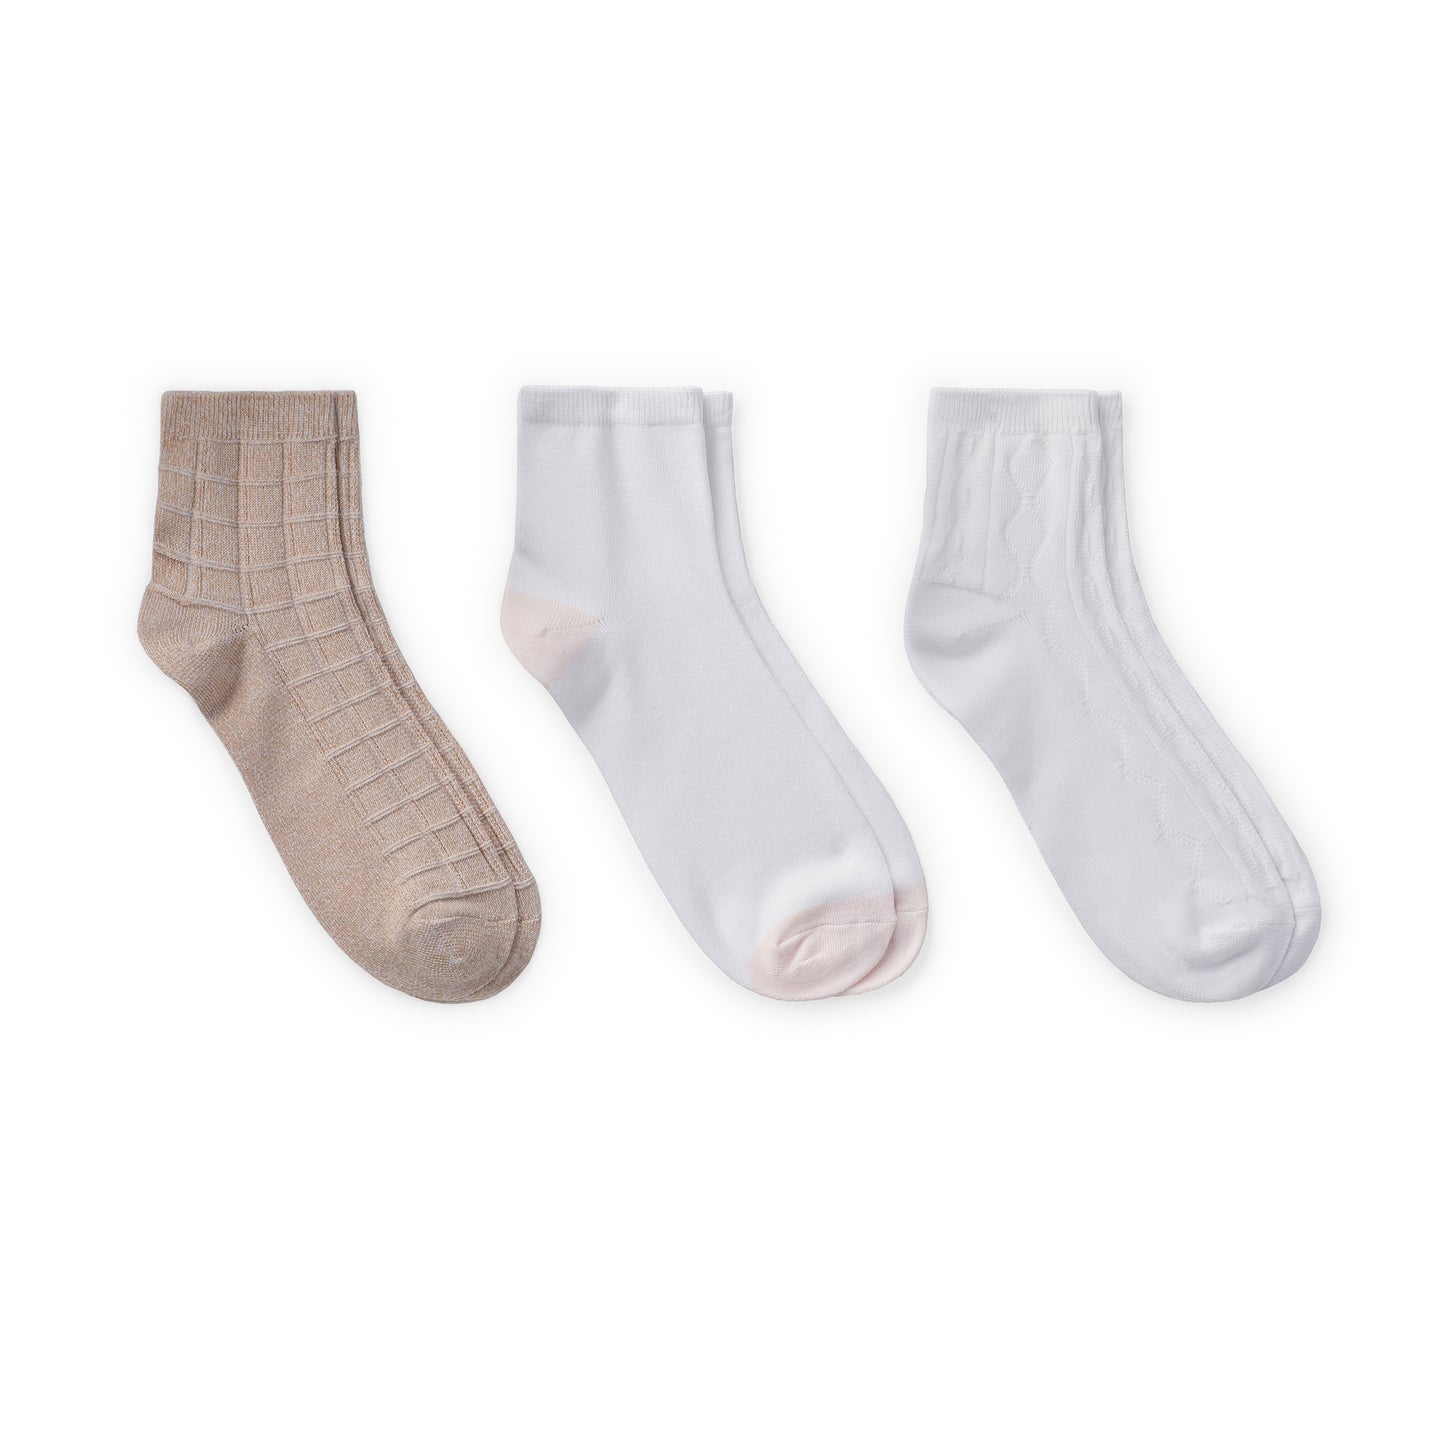 Cement;@Texture Anklet Sock 3 Pack